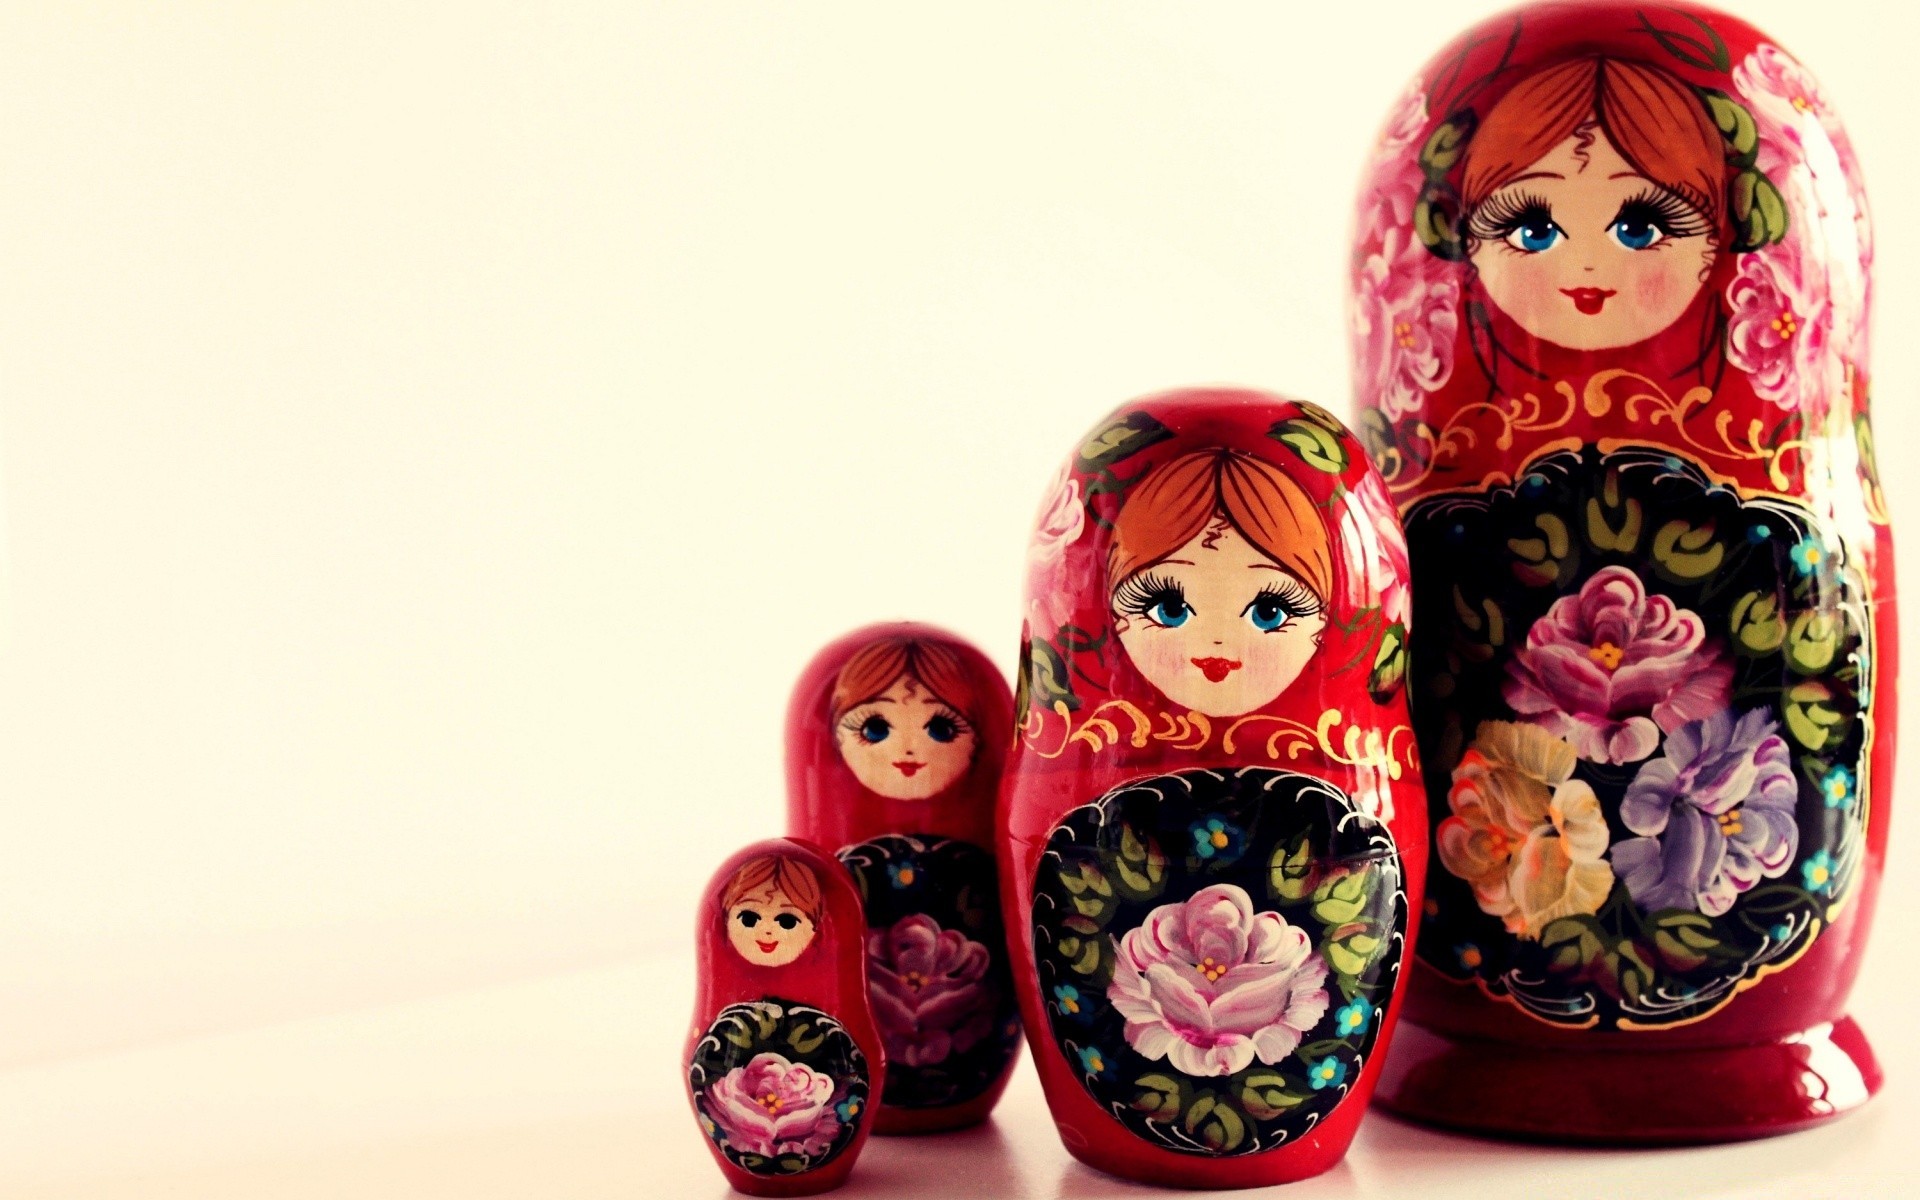 Vintage Doll Cute Toy Decoration Traditional - HD Wallpaper 